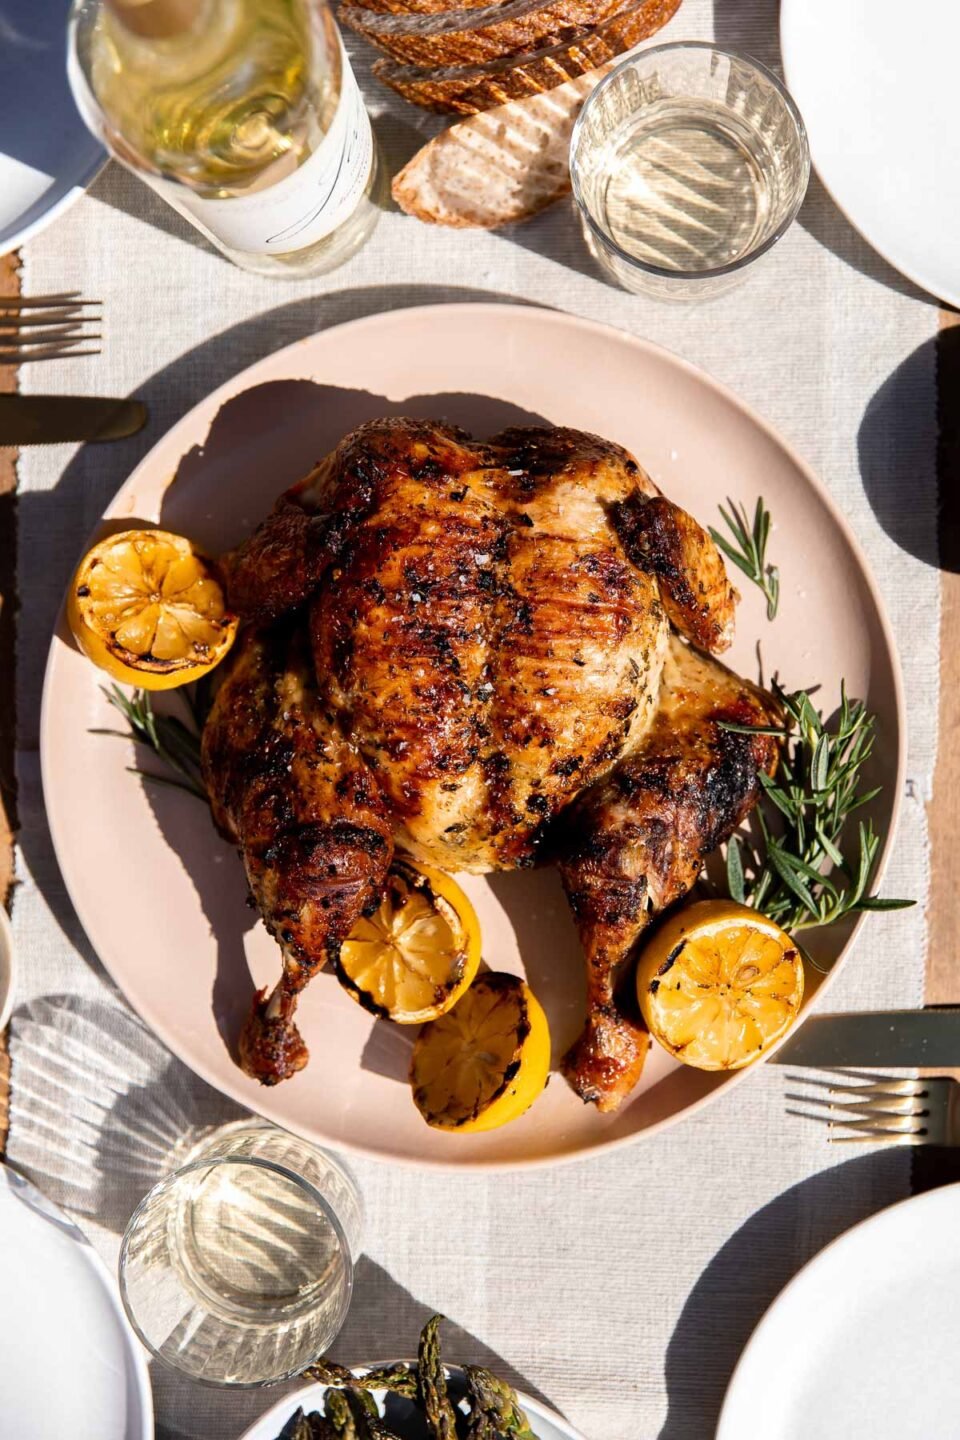 A finished grilled spatchcock chicken rests atop a peach colored serving platter with fresh sprigs of rosemary and charred lemons surrounding the chicken. The platter sits atop a light gray and white linen table runner. Two glasses of wine, a white wine bottle, slices of fresh bread, a platter of grilled asparagus, and place settings surround the chicken at center.